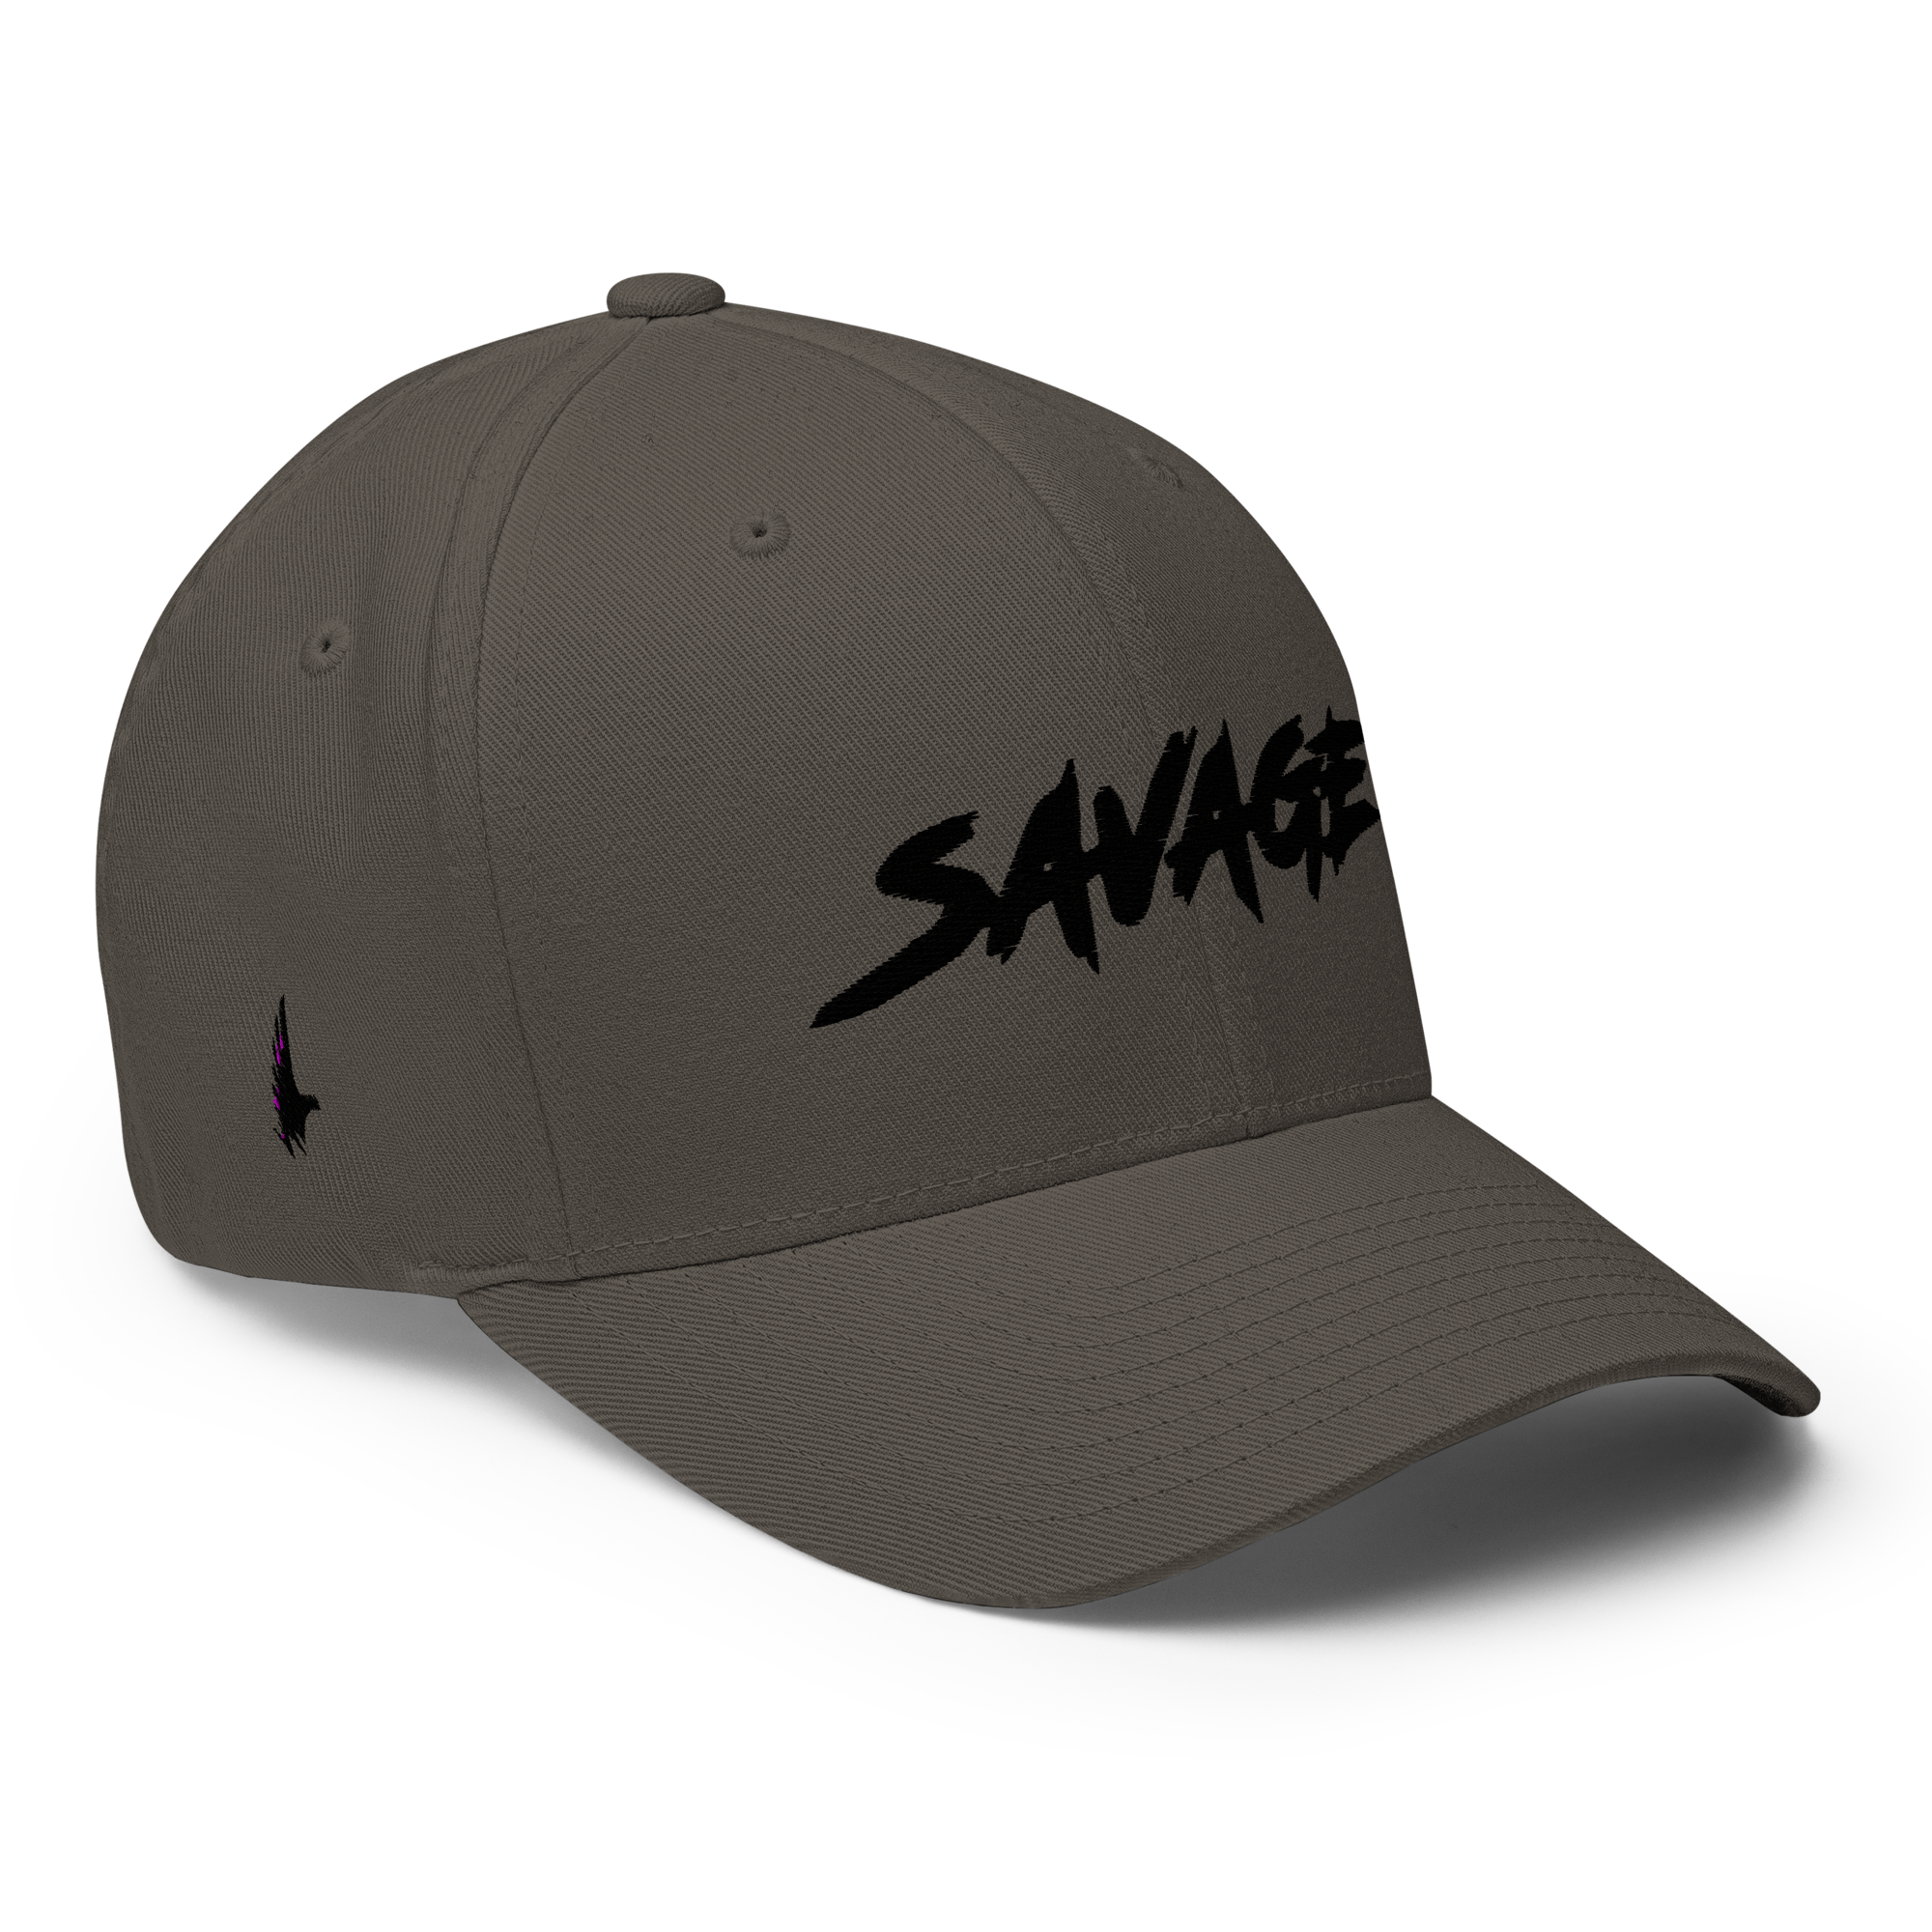 Savage Fitted Hat Charcoal Grey Black - Loyalty Vibes